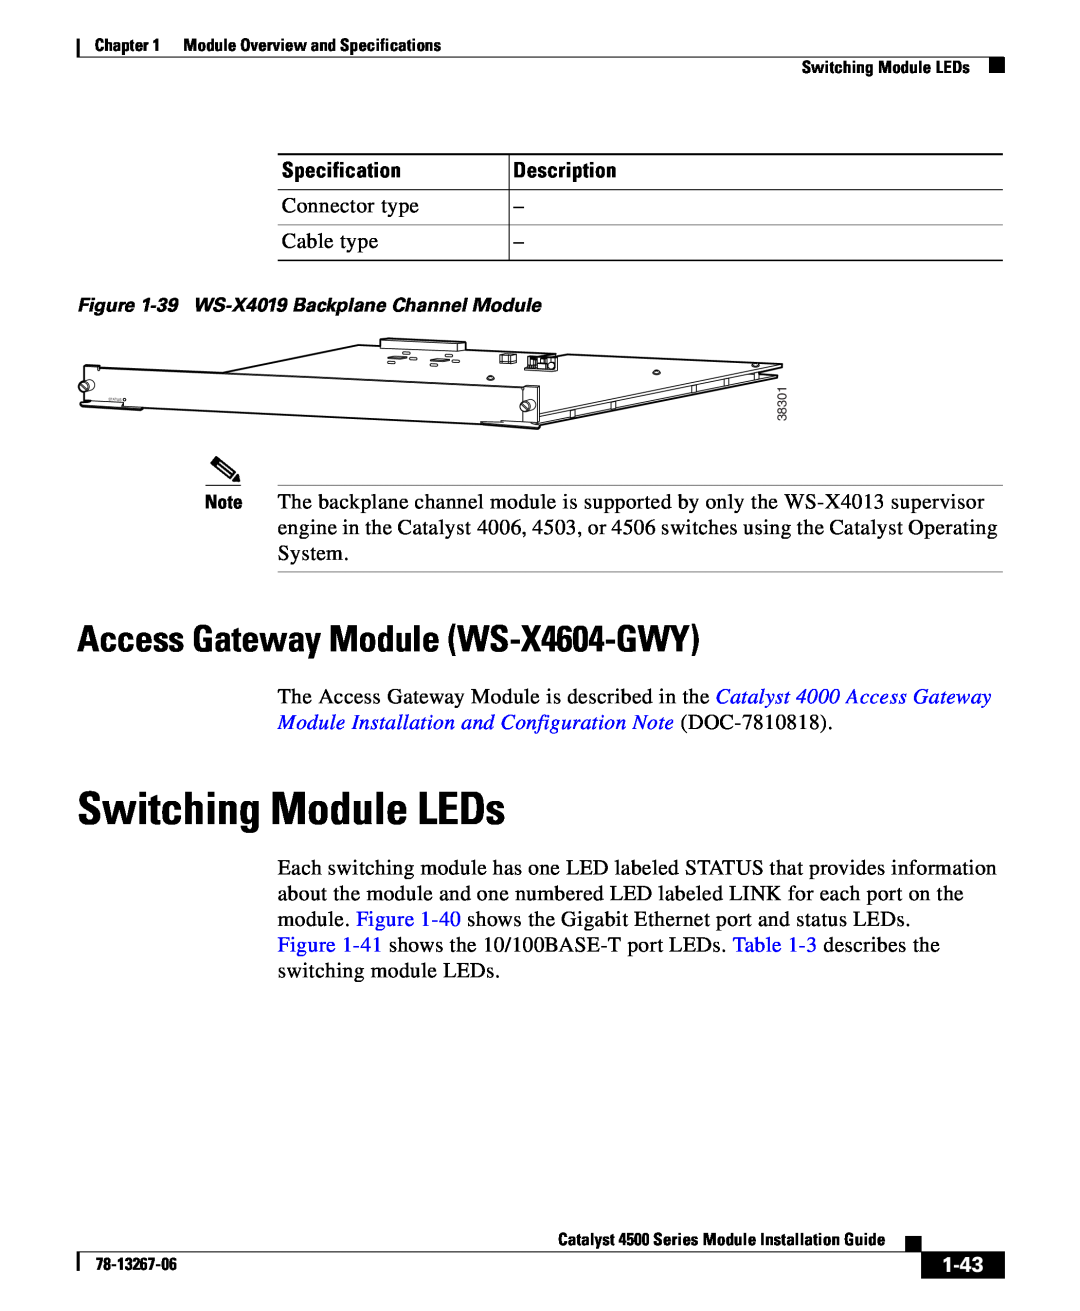 Cisco Systems 4000 Switching Module LEDs, Access Gateway Module WS-X4604-GWY, 1-43, Specification, Description 